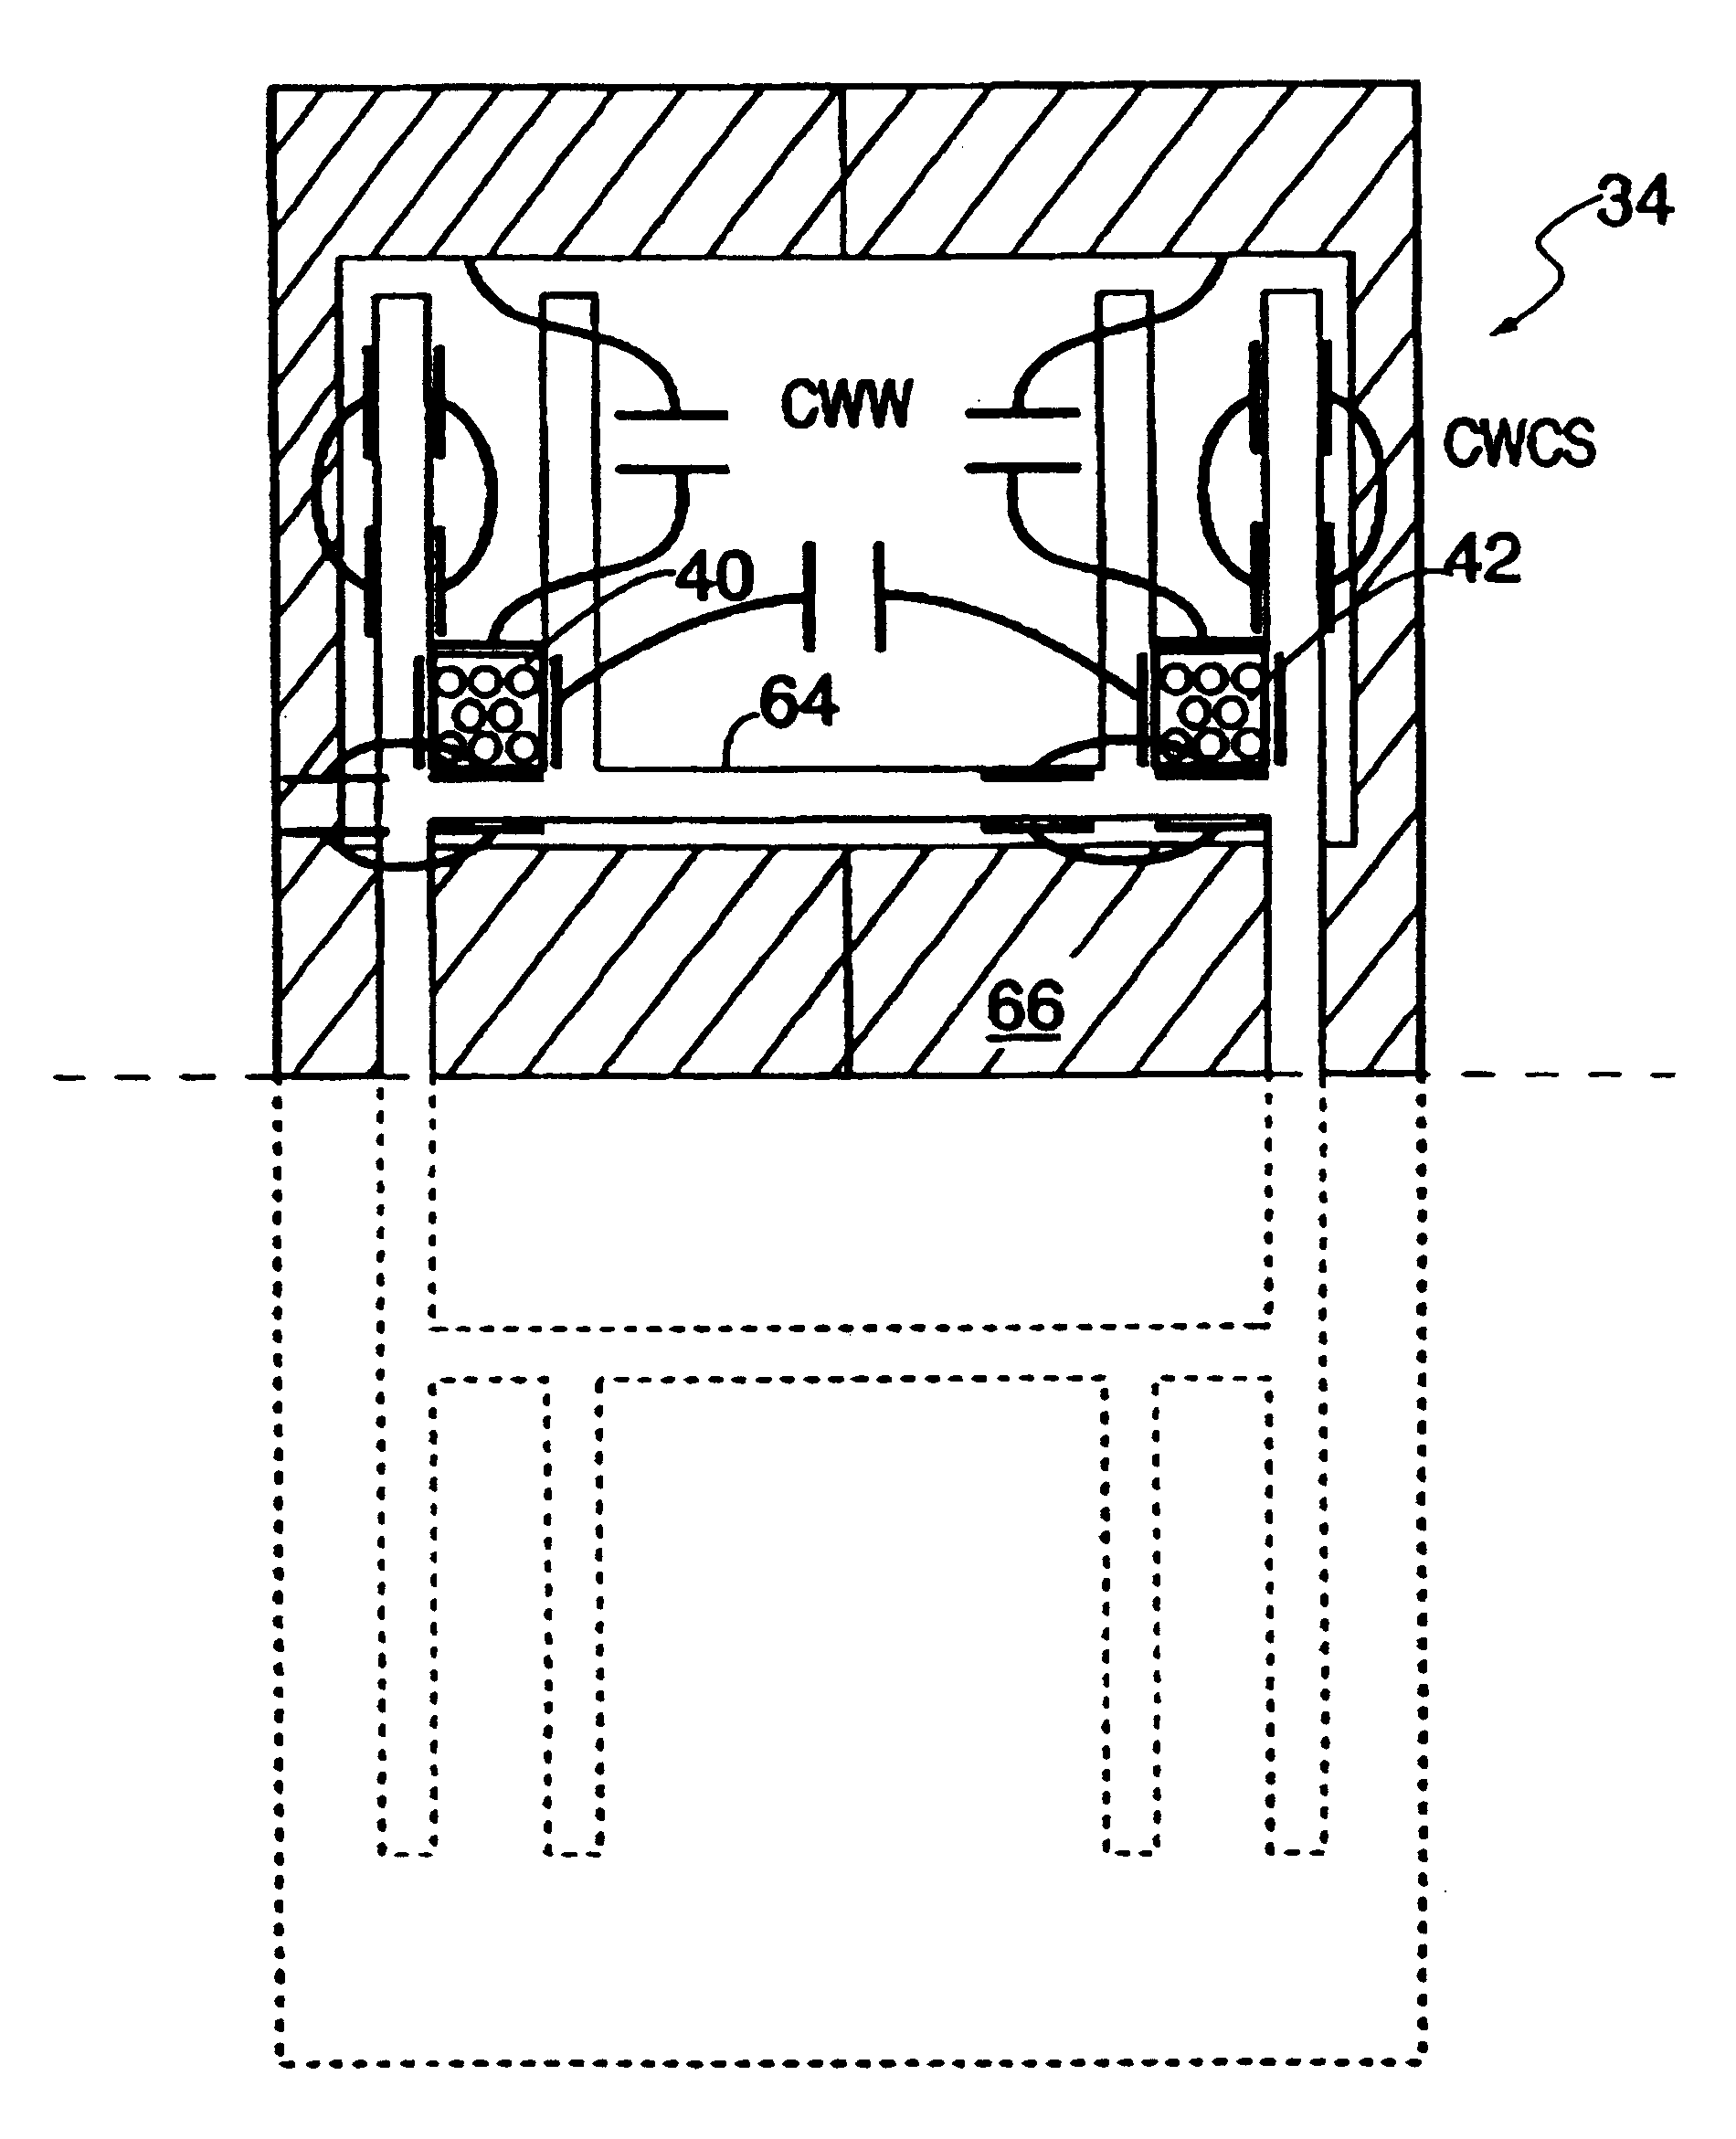 High frequency pulse transformer for an IGBT gate drive